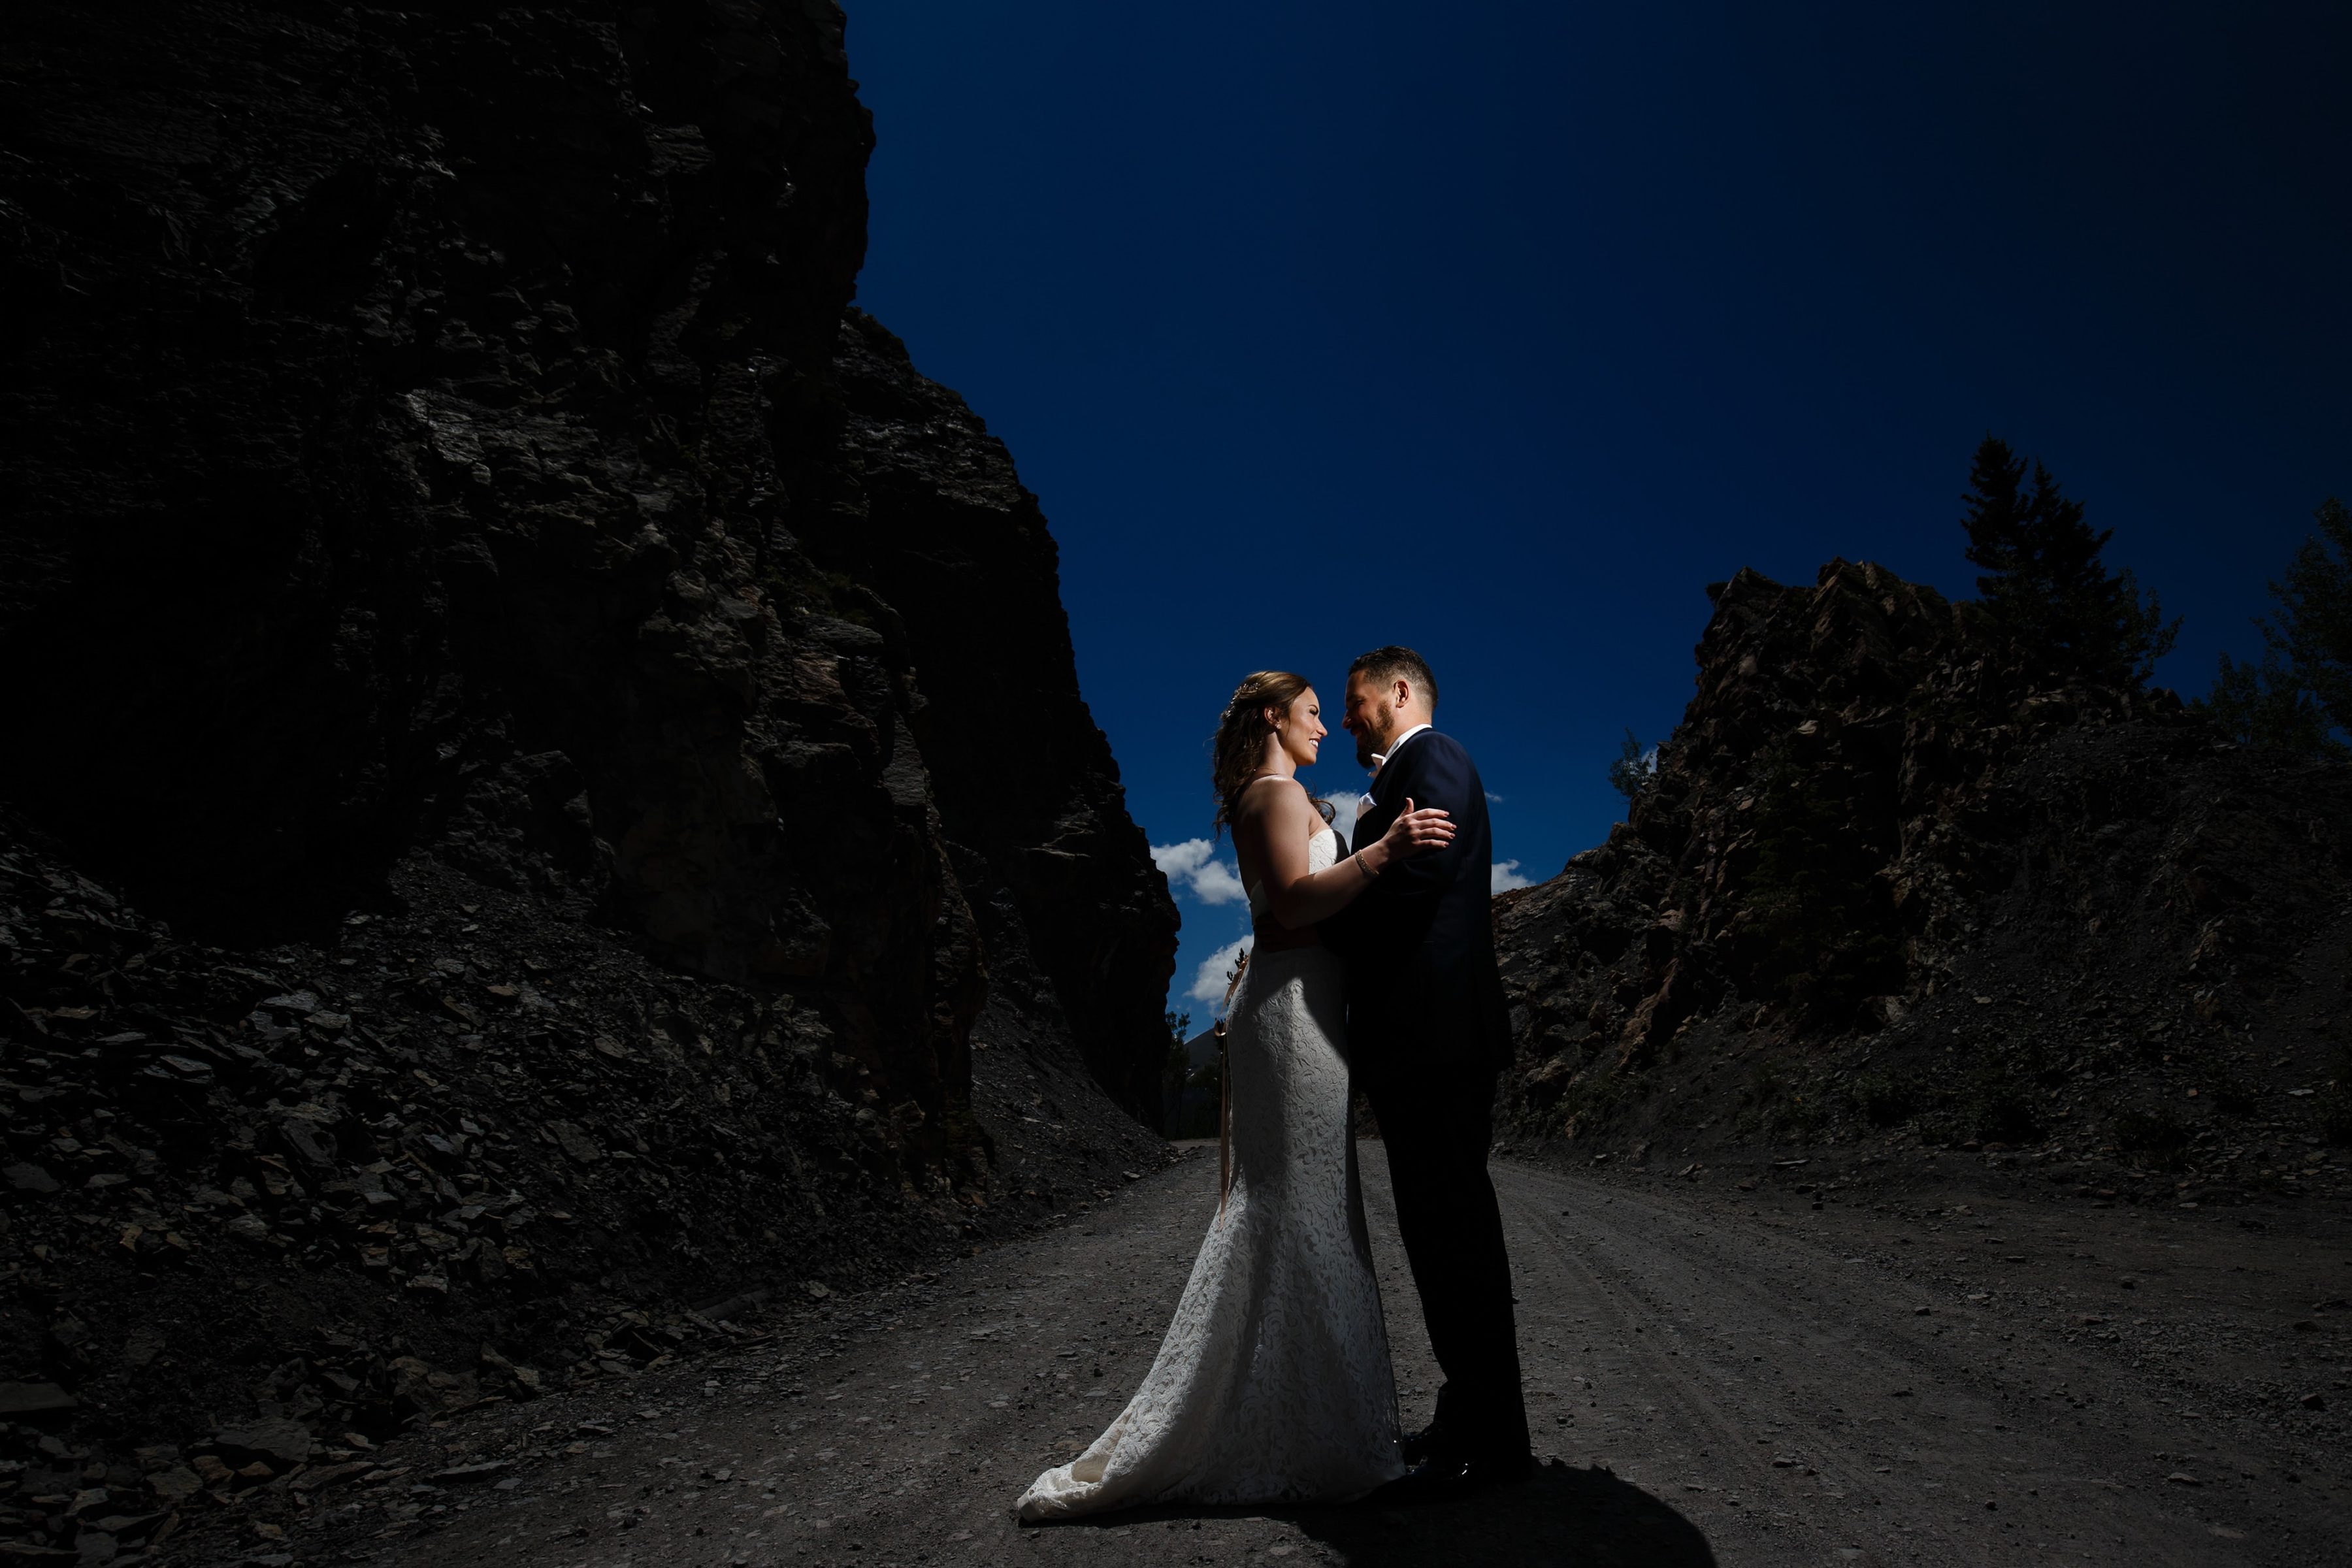 Sharon and Nick pose for a portrait on Boreas Pass road before their wedding at TenMile Station